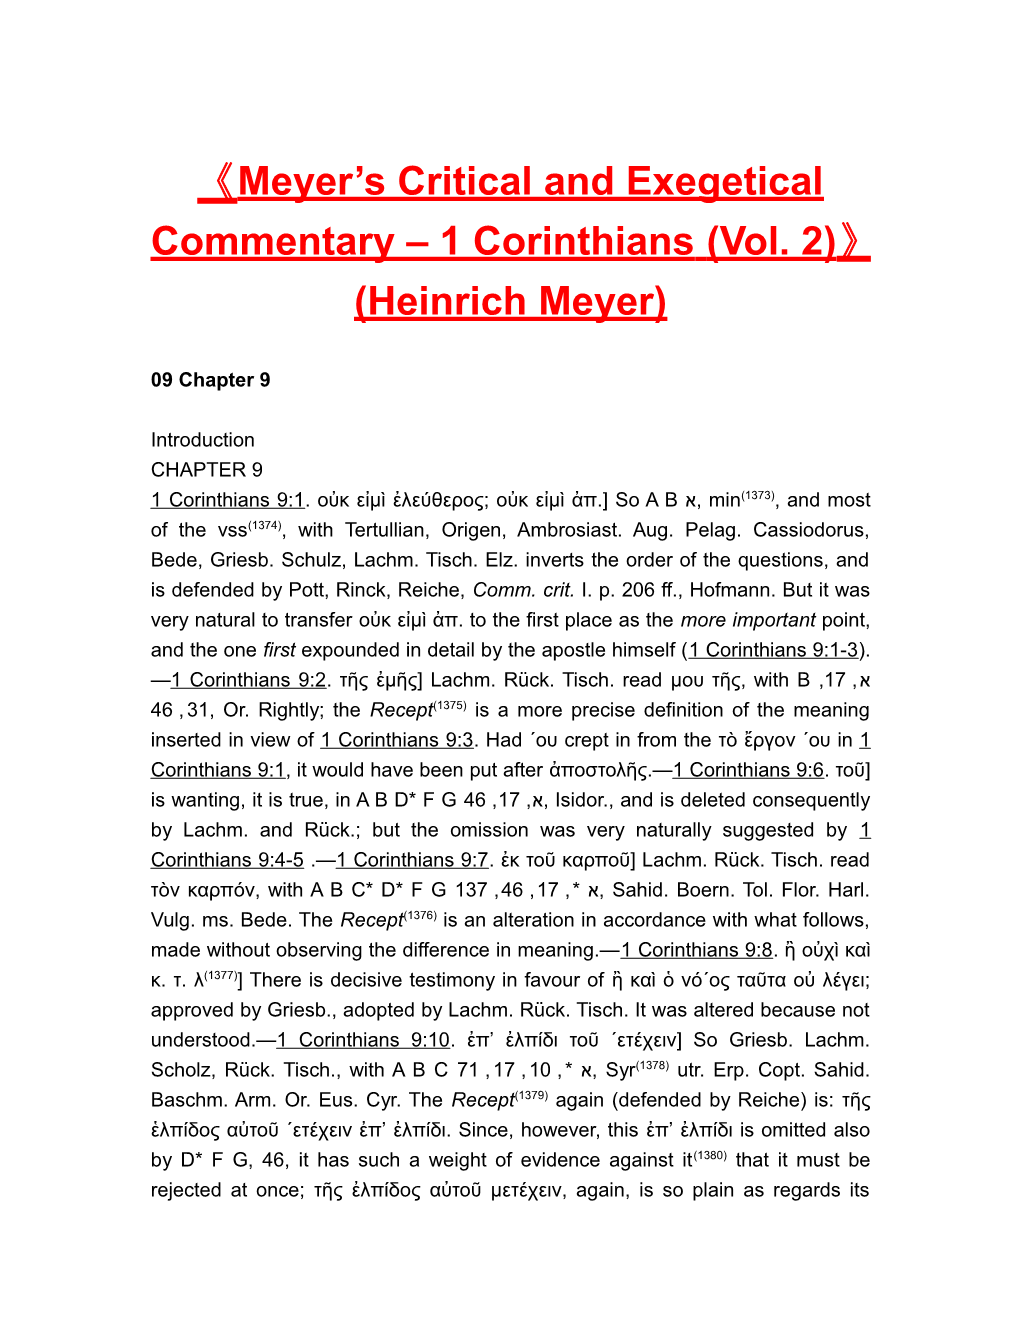 Meyer S Critical and Exegetical Commentary 1 Corinthians (Vol. 2) (Heinrich Meyer)